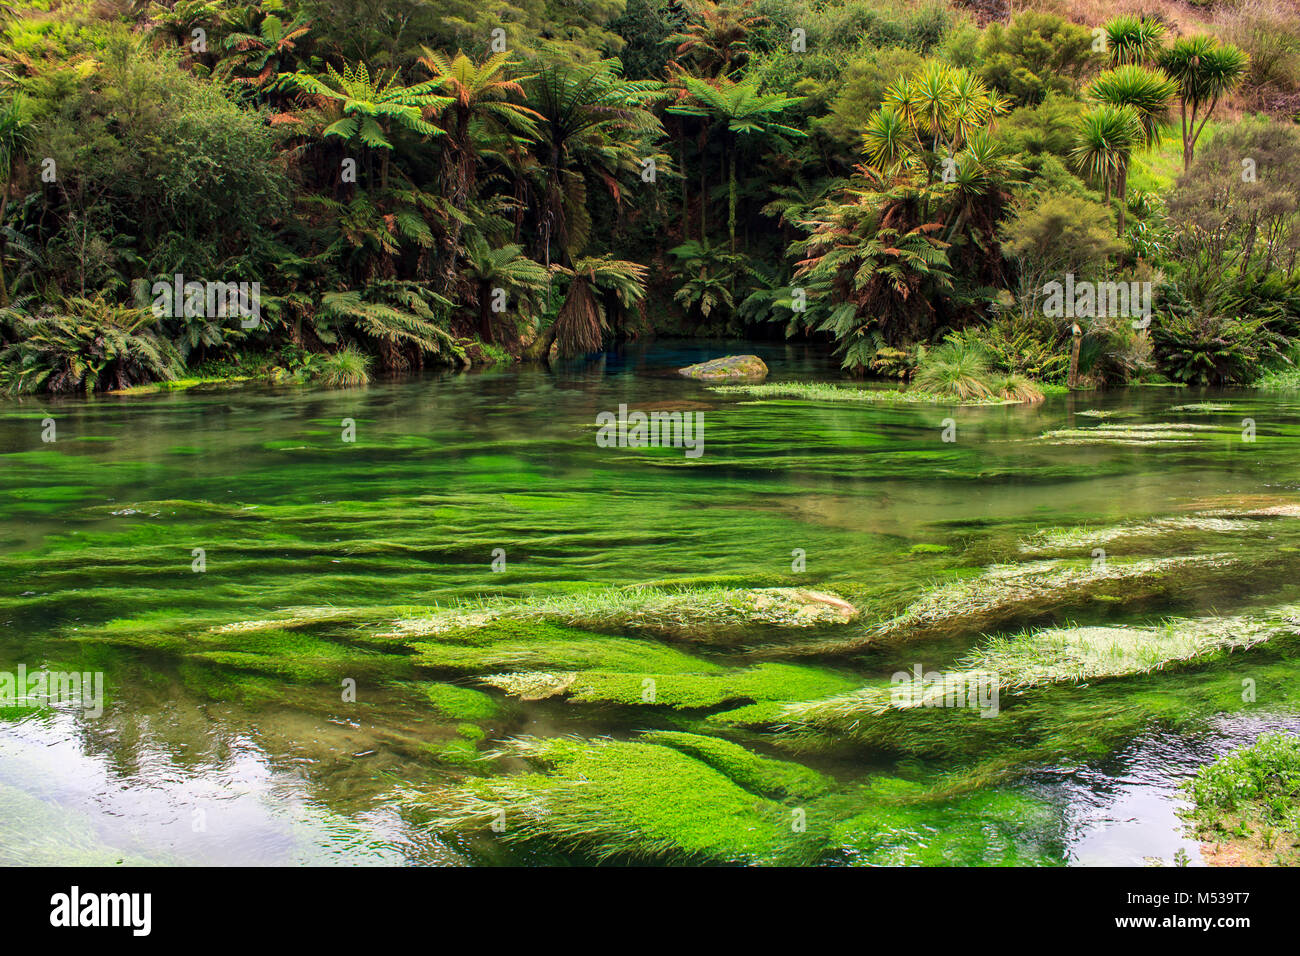 Crystal clear water in New Zealand's Blue Spring surrounded by bright green foliage Stock Photo